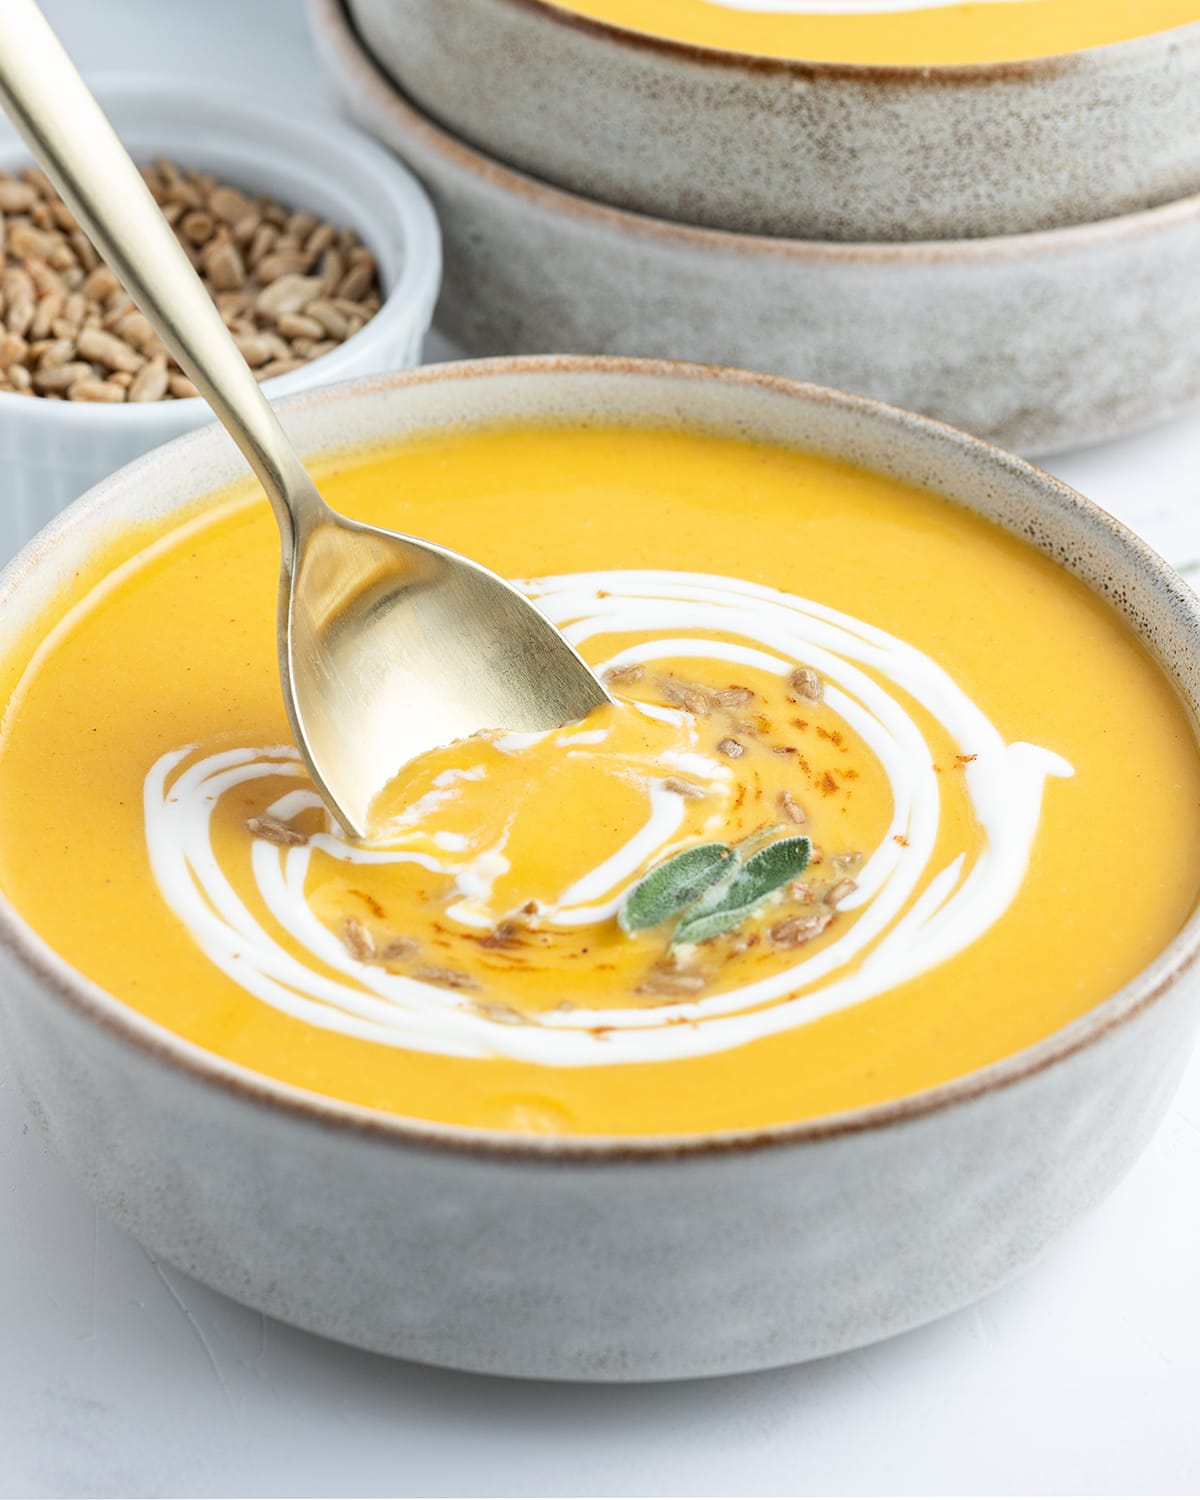 A spoon dipping into a bowl of butternut squash soup.